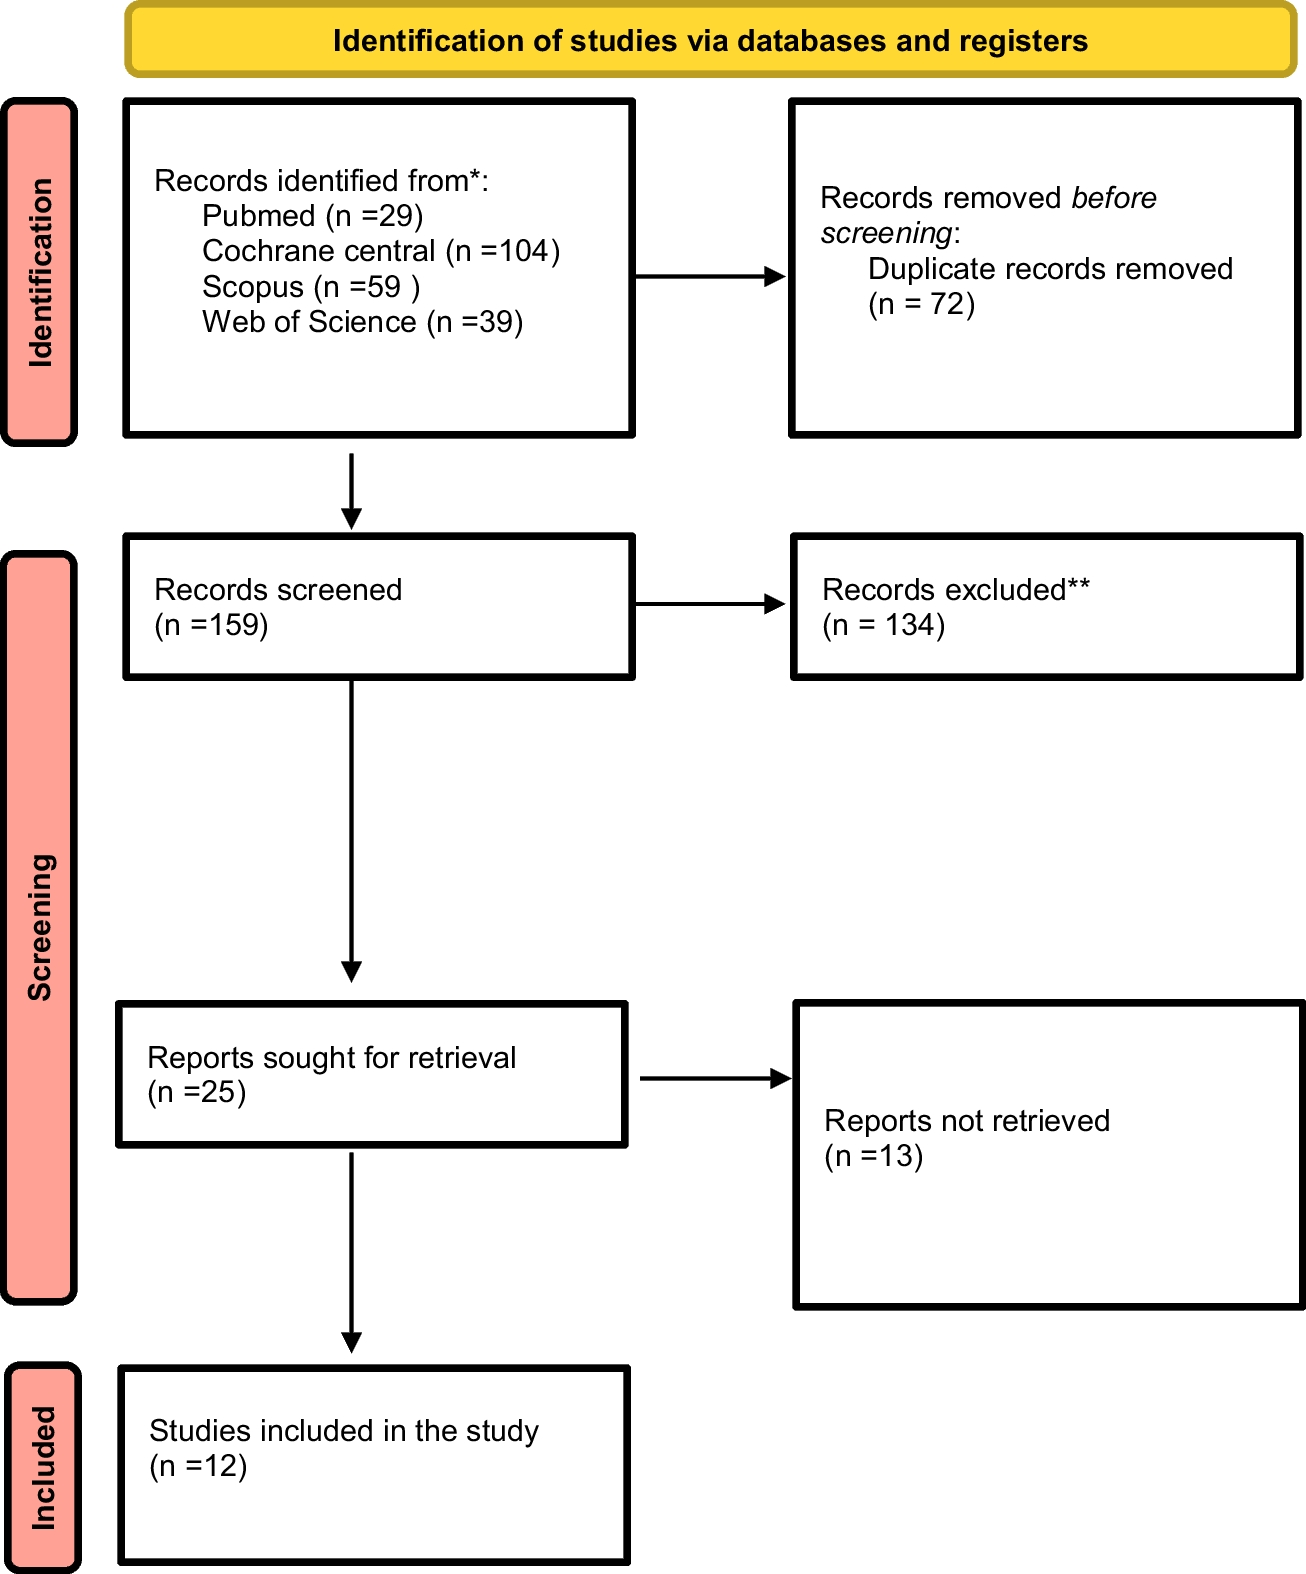 Assessing the Impact of Bariatric Surgery on Retinol-Binding Protein 4 (RBP4): A Systematic Review and Meta-Analysis